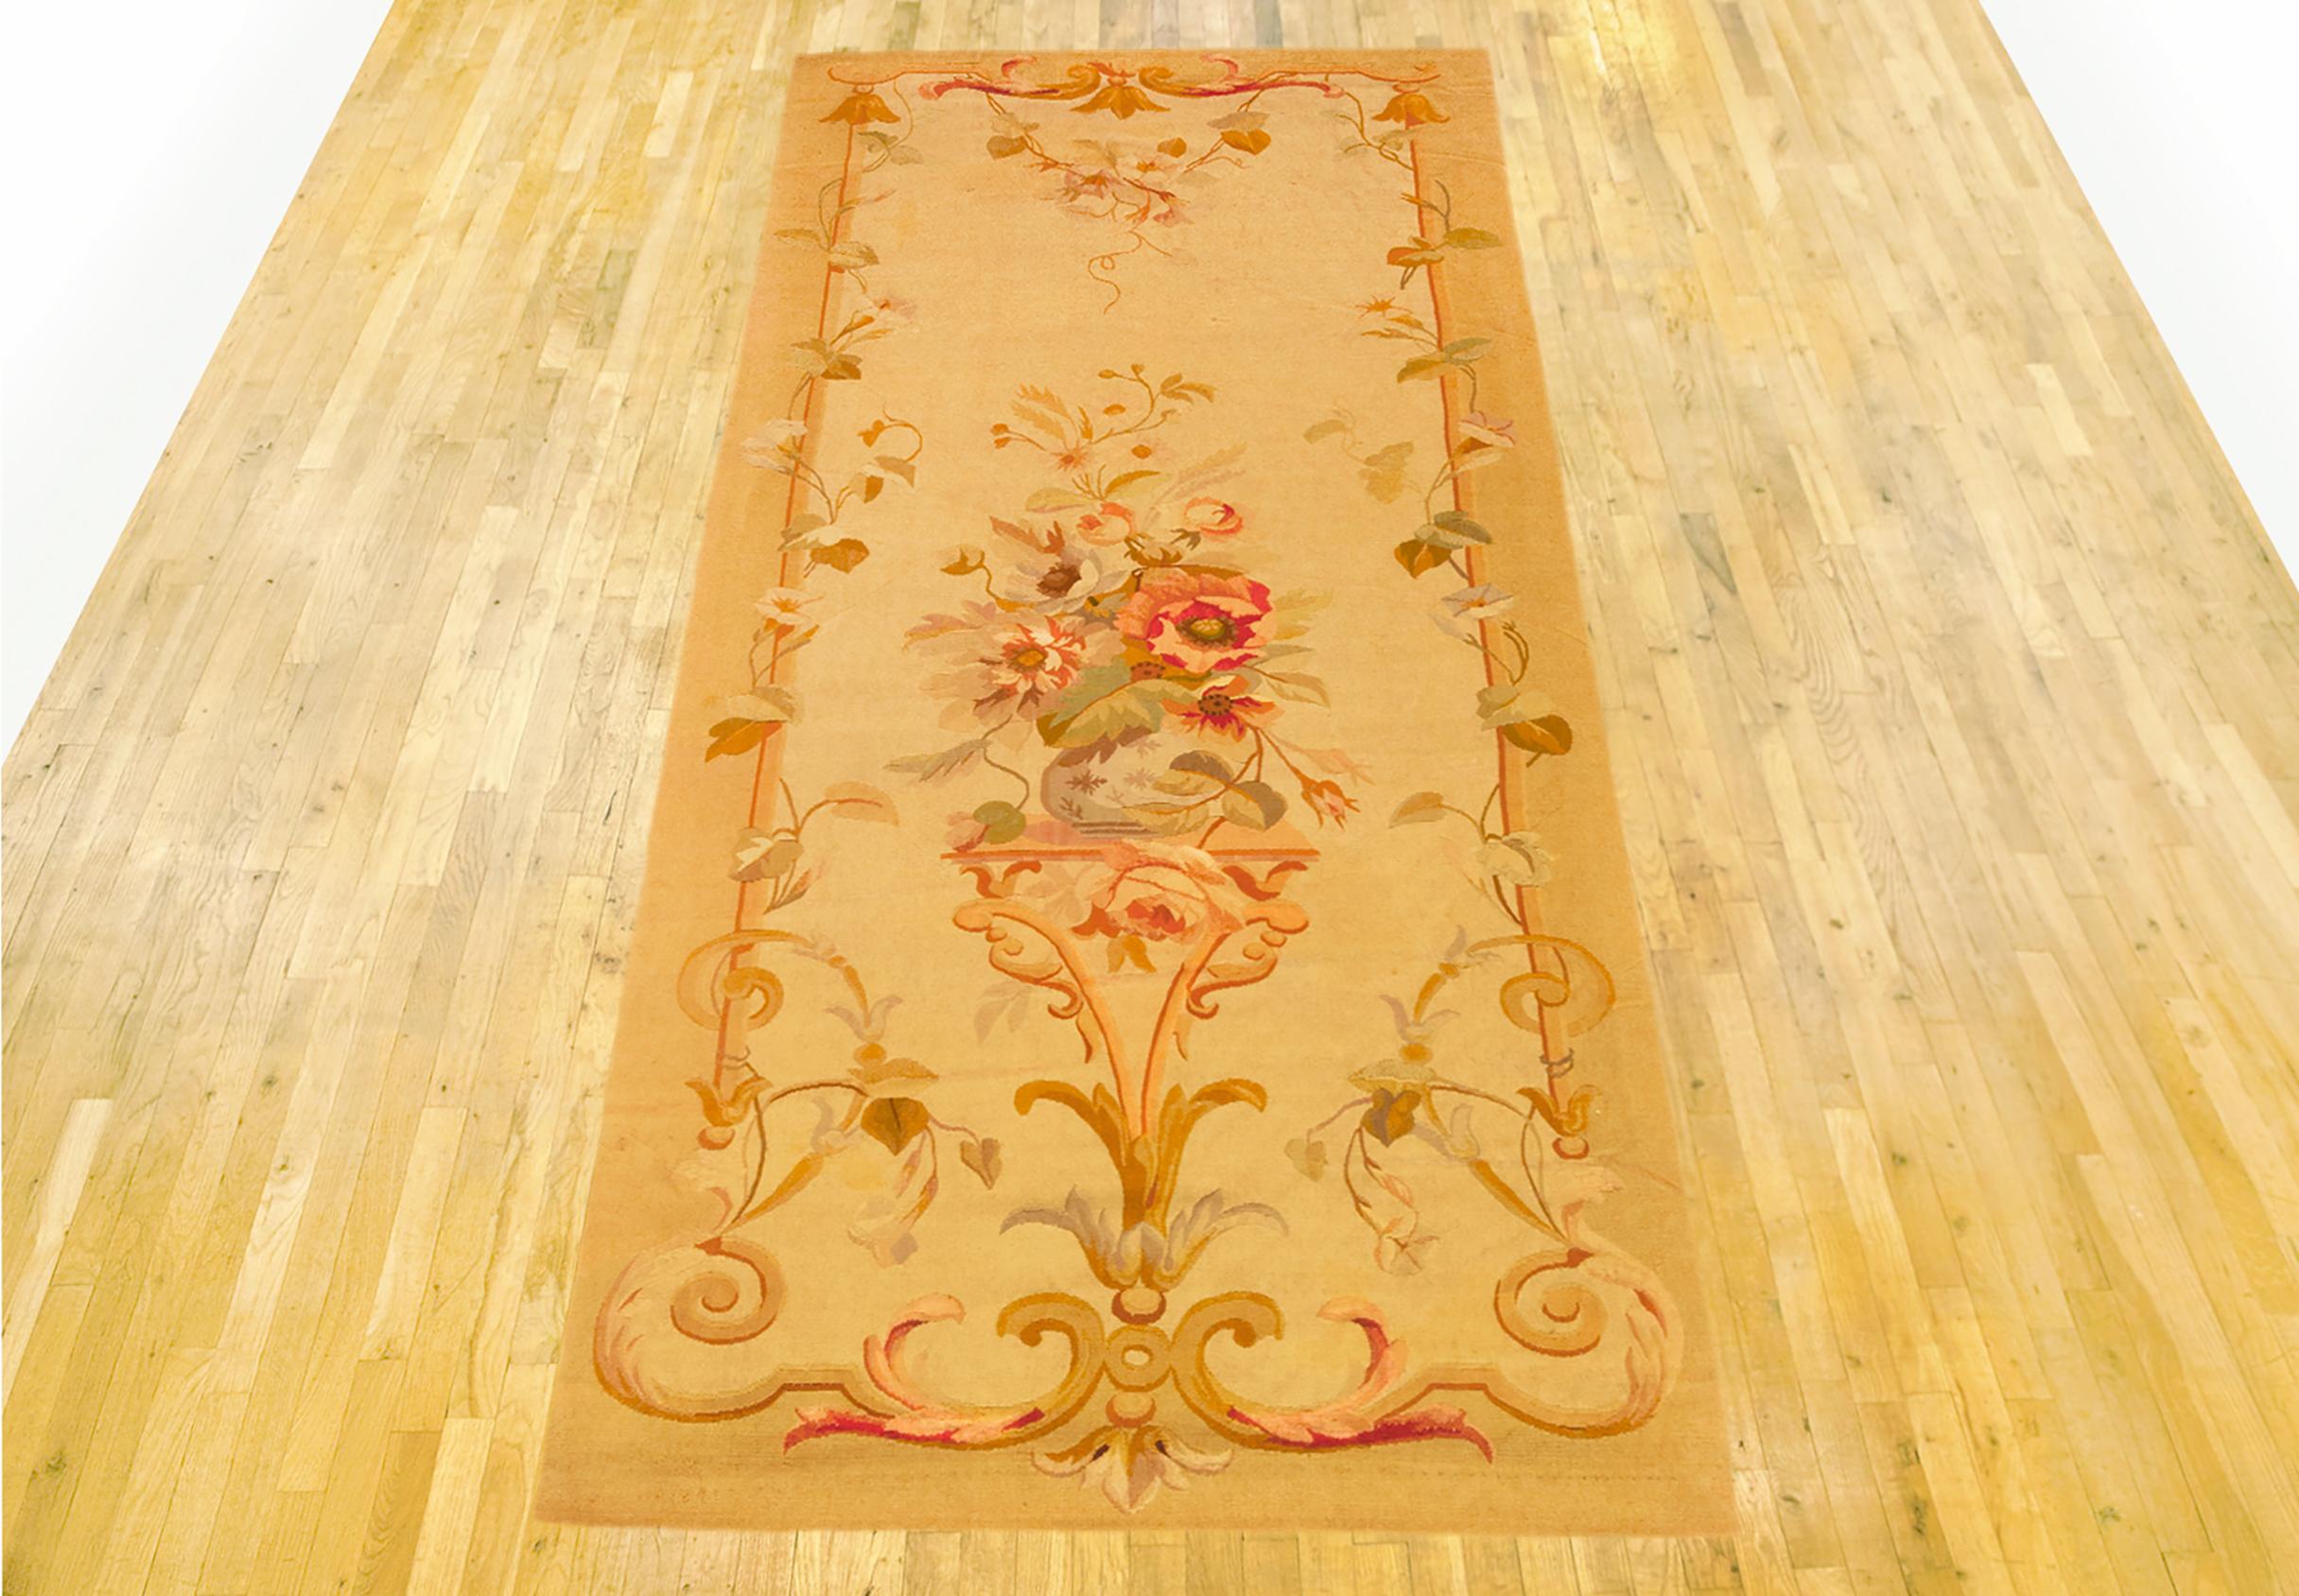 Antique French Aubusson Rug, Runner size, circa 1890

A one-of-a-kind antique French Aubusson Carpet, hand-knotted with soft wool pile. This lovely hand-knotted wool rug features a central medallion design on the beige primary field, with a delicate